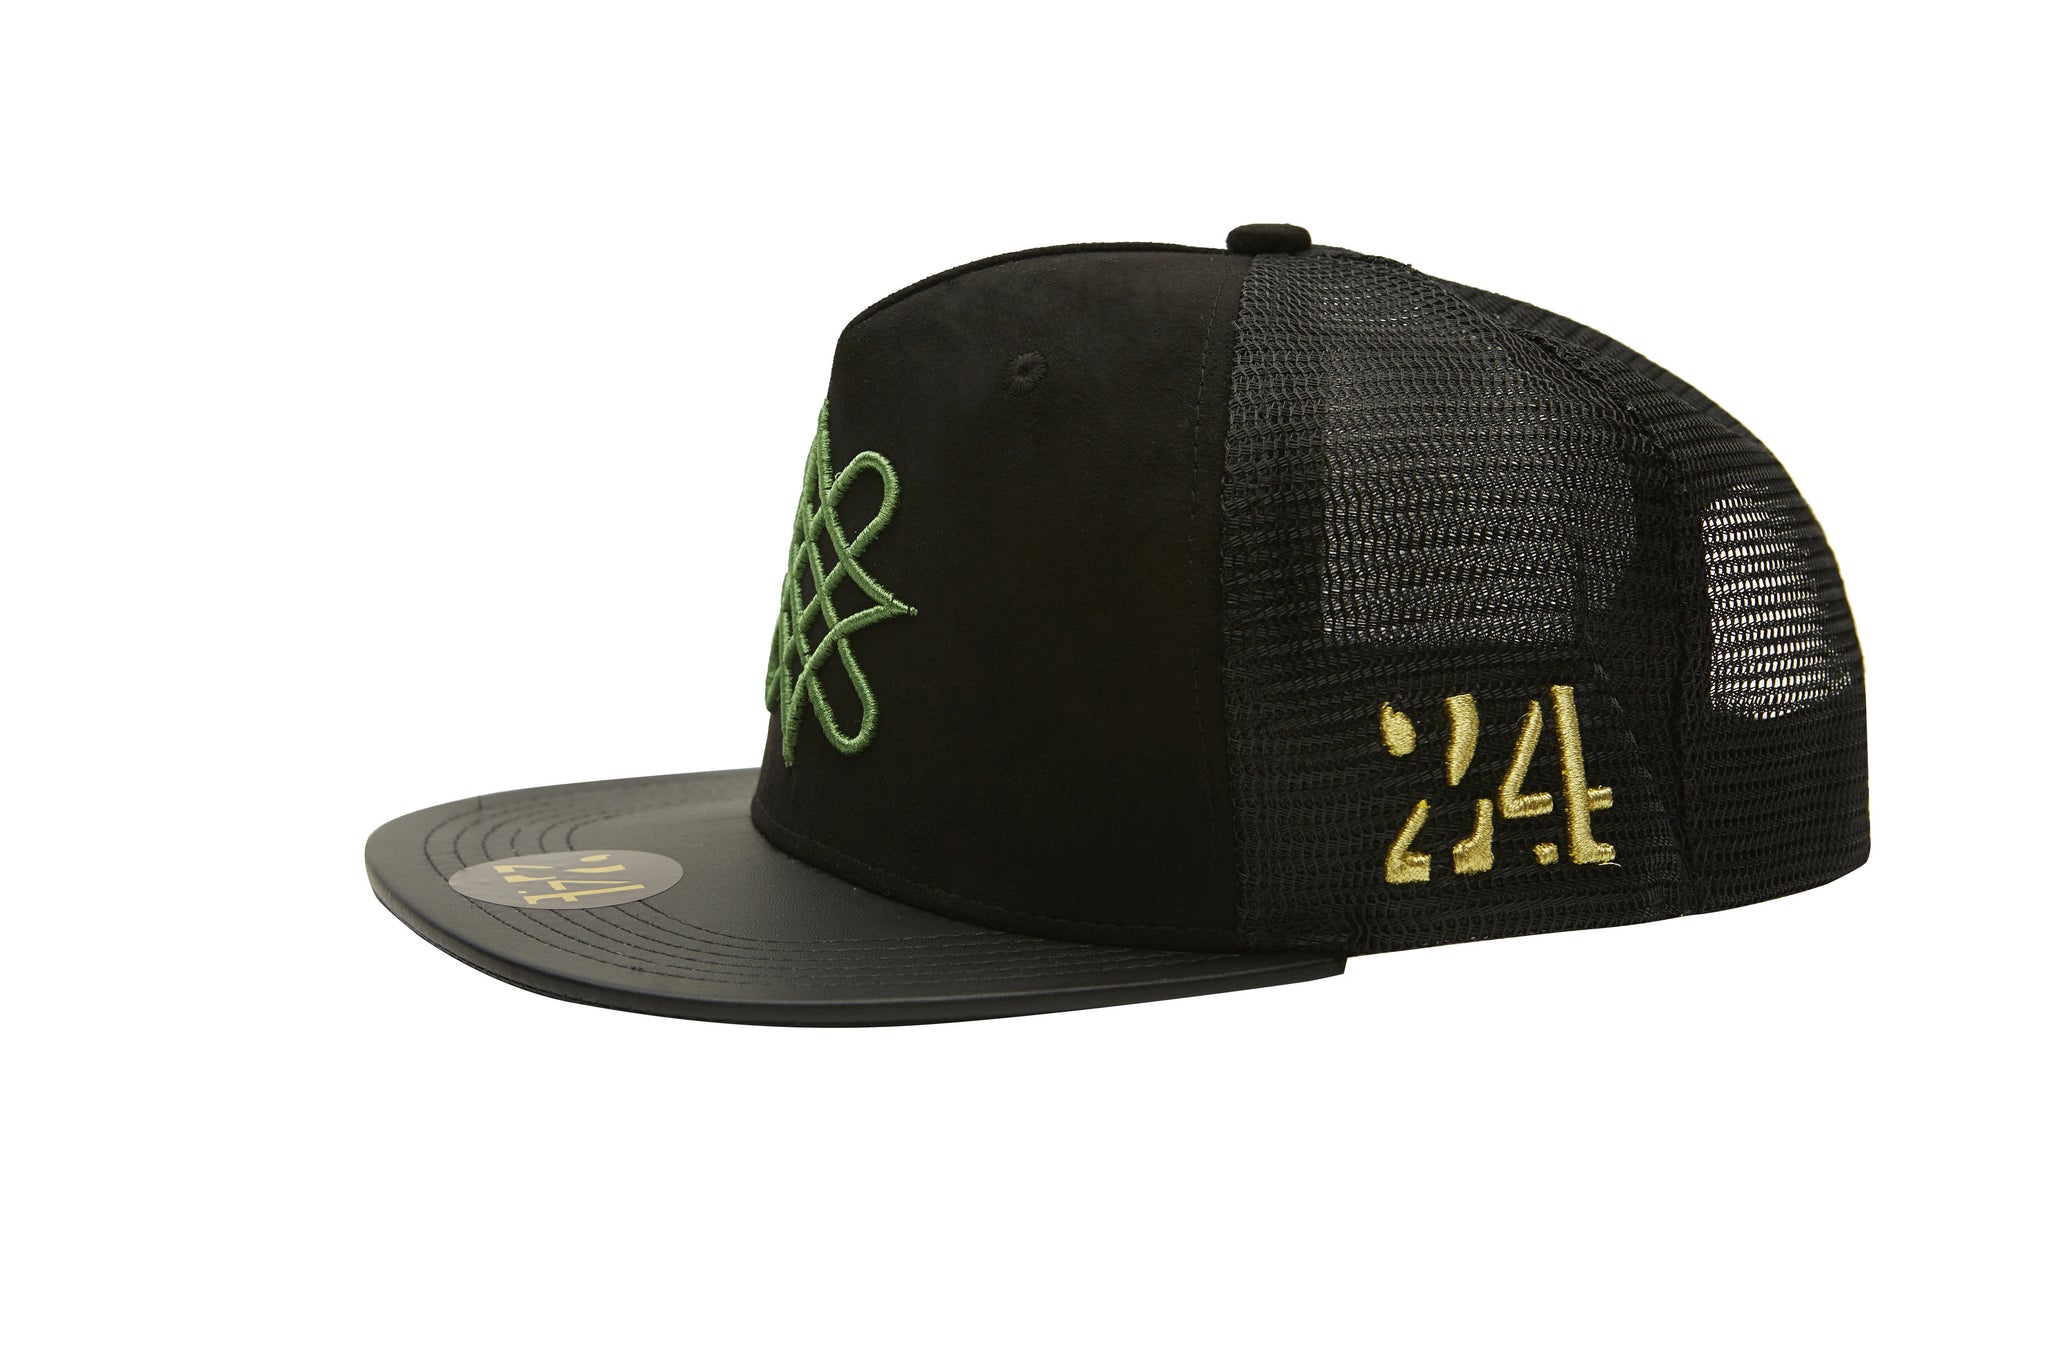 AREWA | Arewa Knot embroidered on Black suede Snapback Hat by 24 Apparel